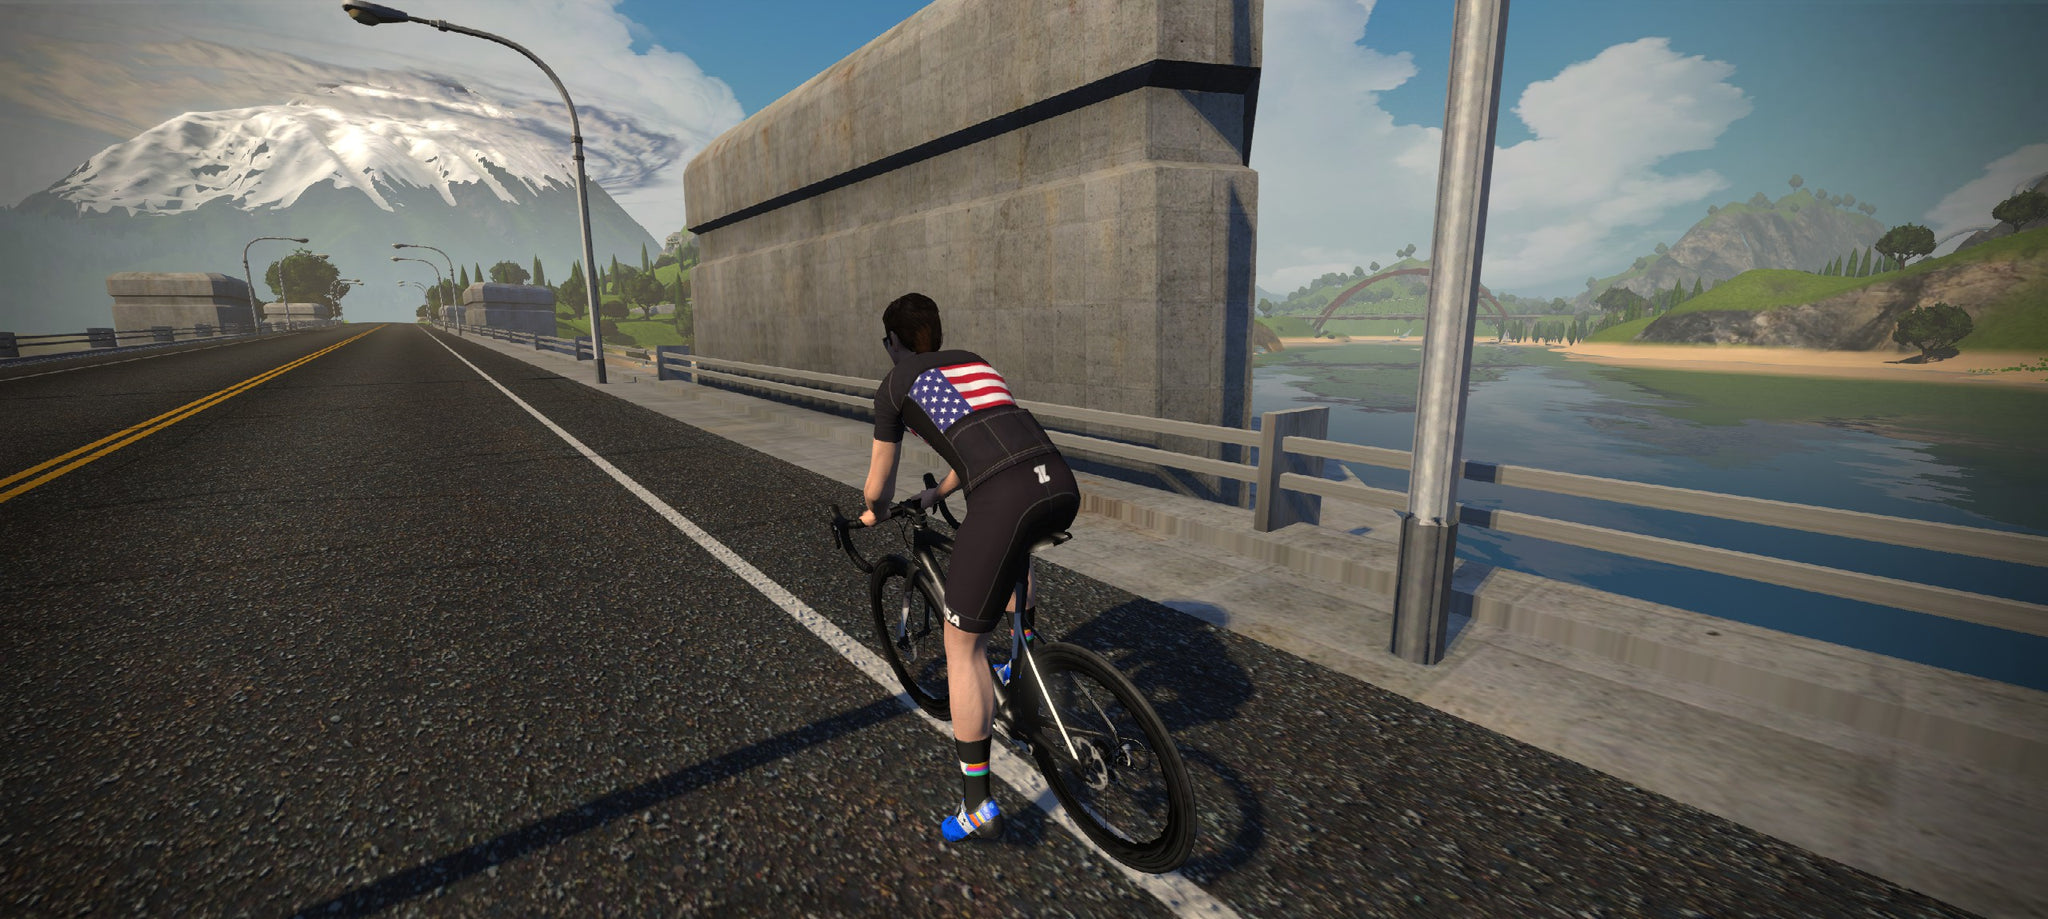 Holden Comeau on Zwift